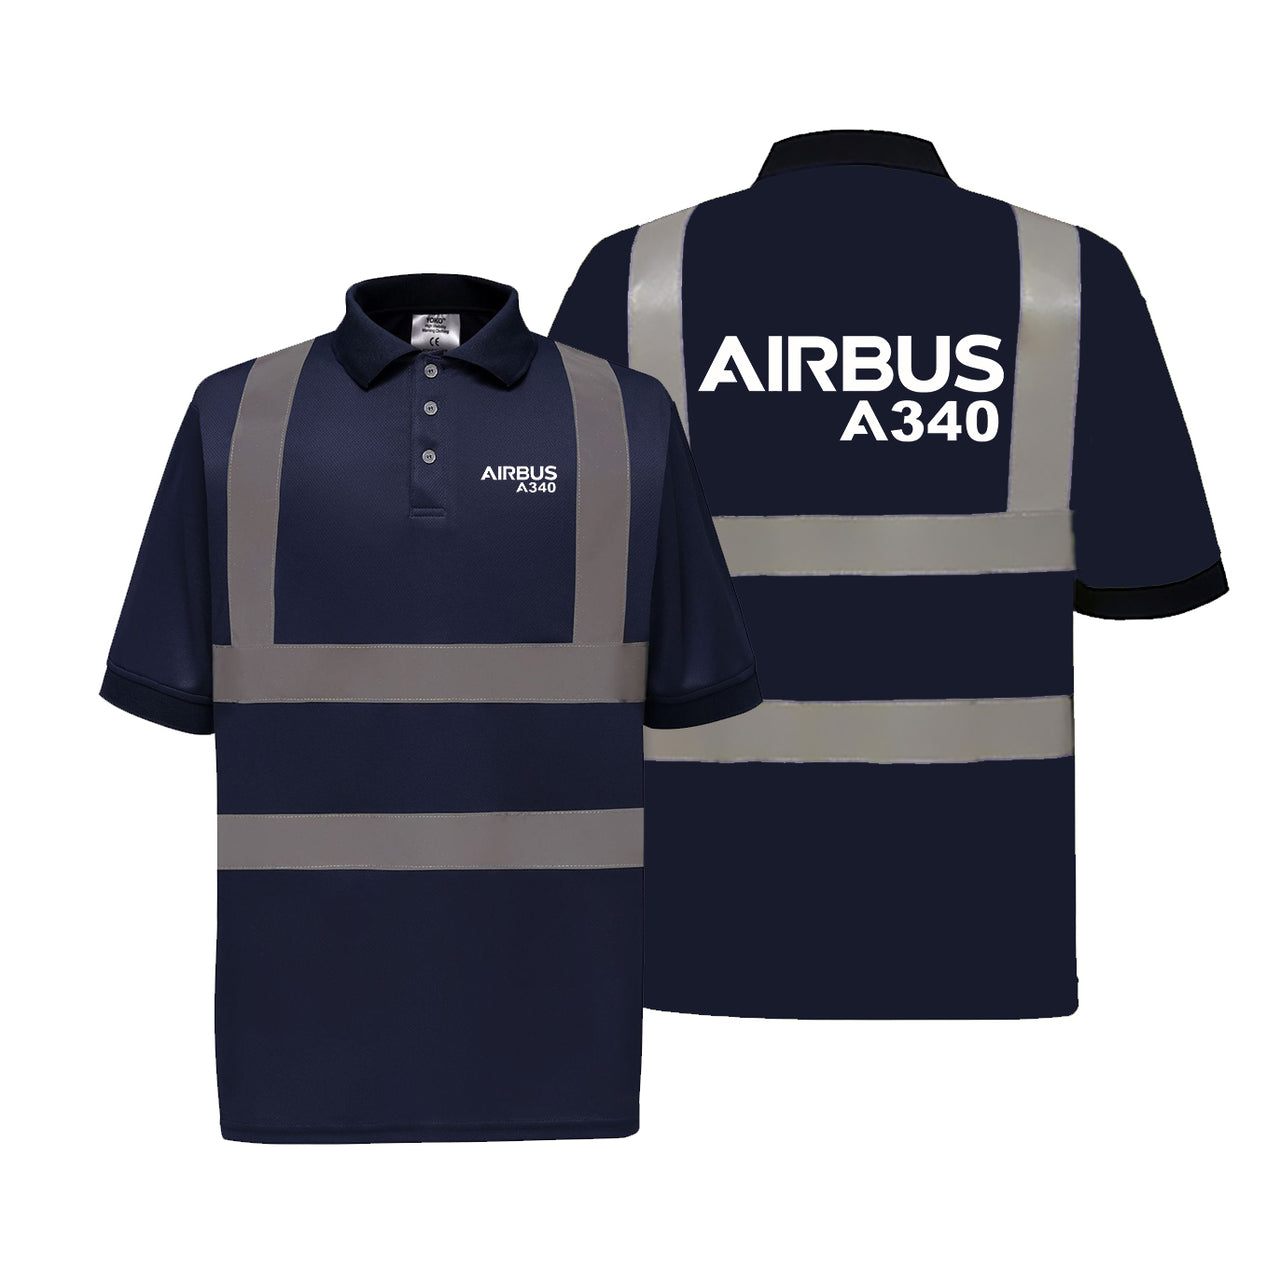 Airbus A340 & Text Designed Reflective Polo T-Shirts